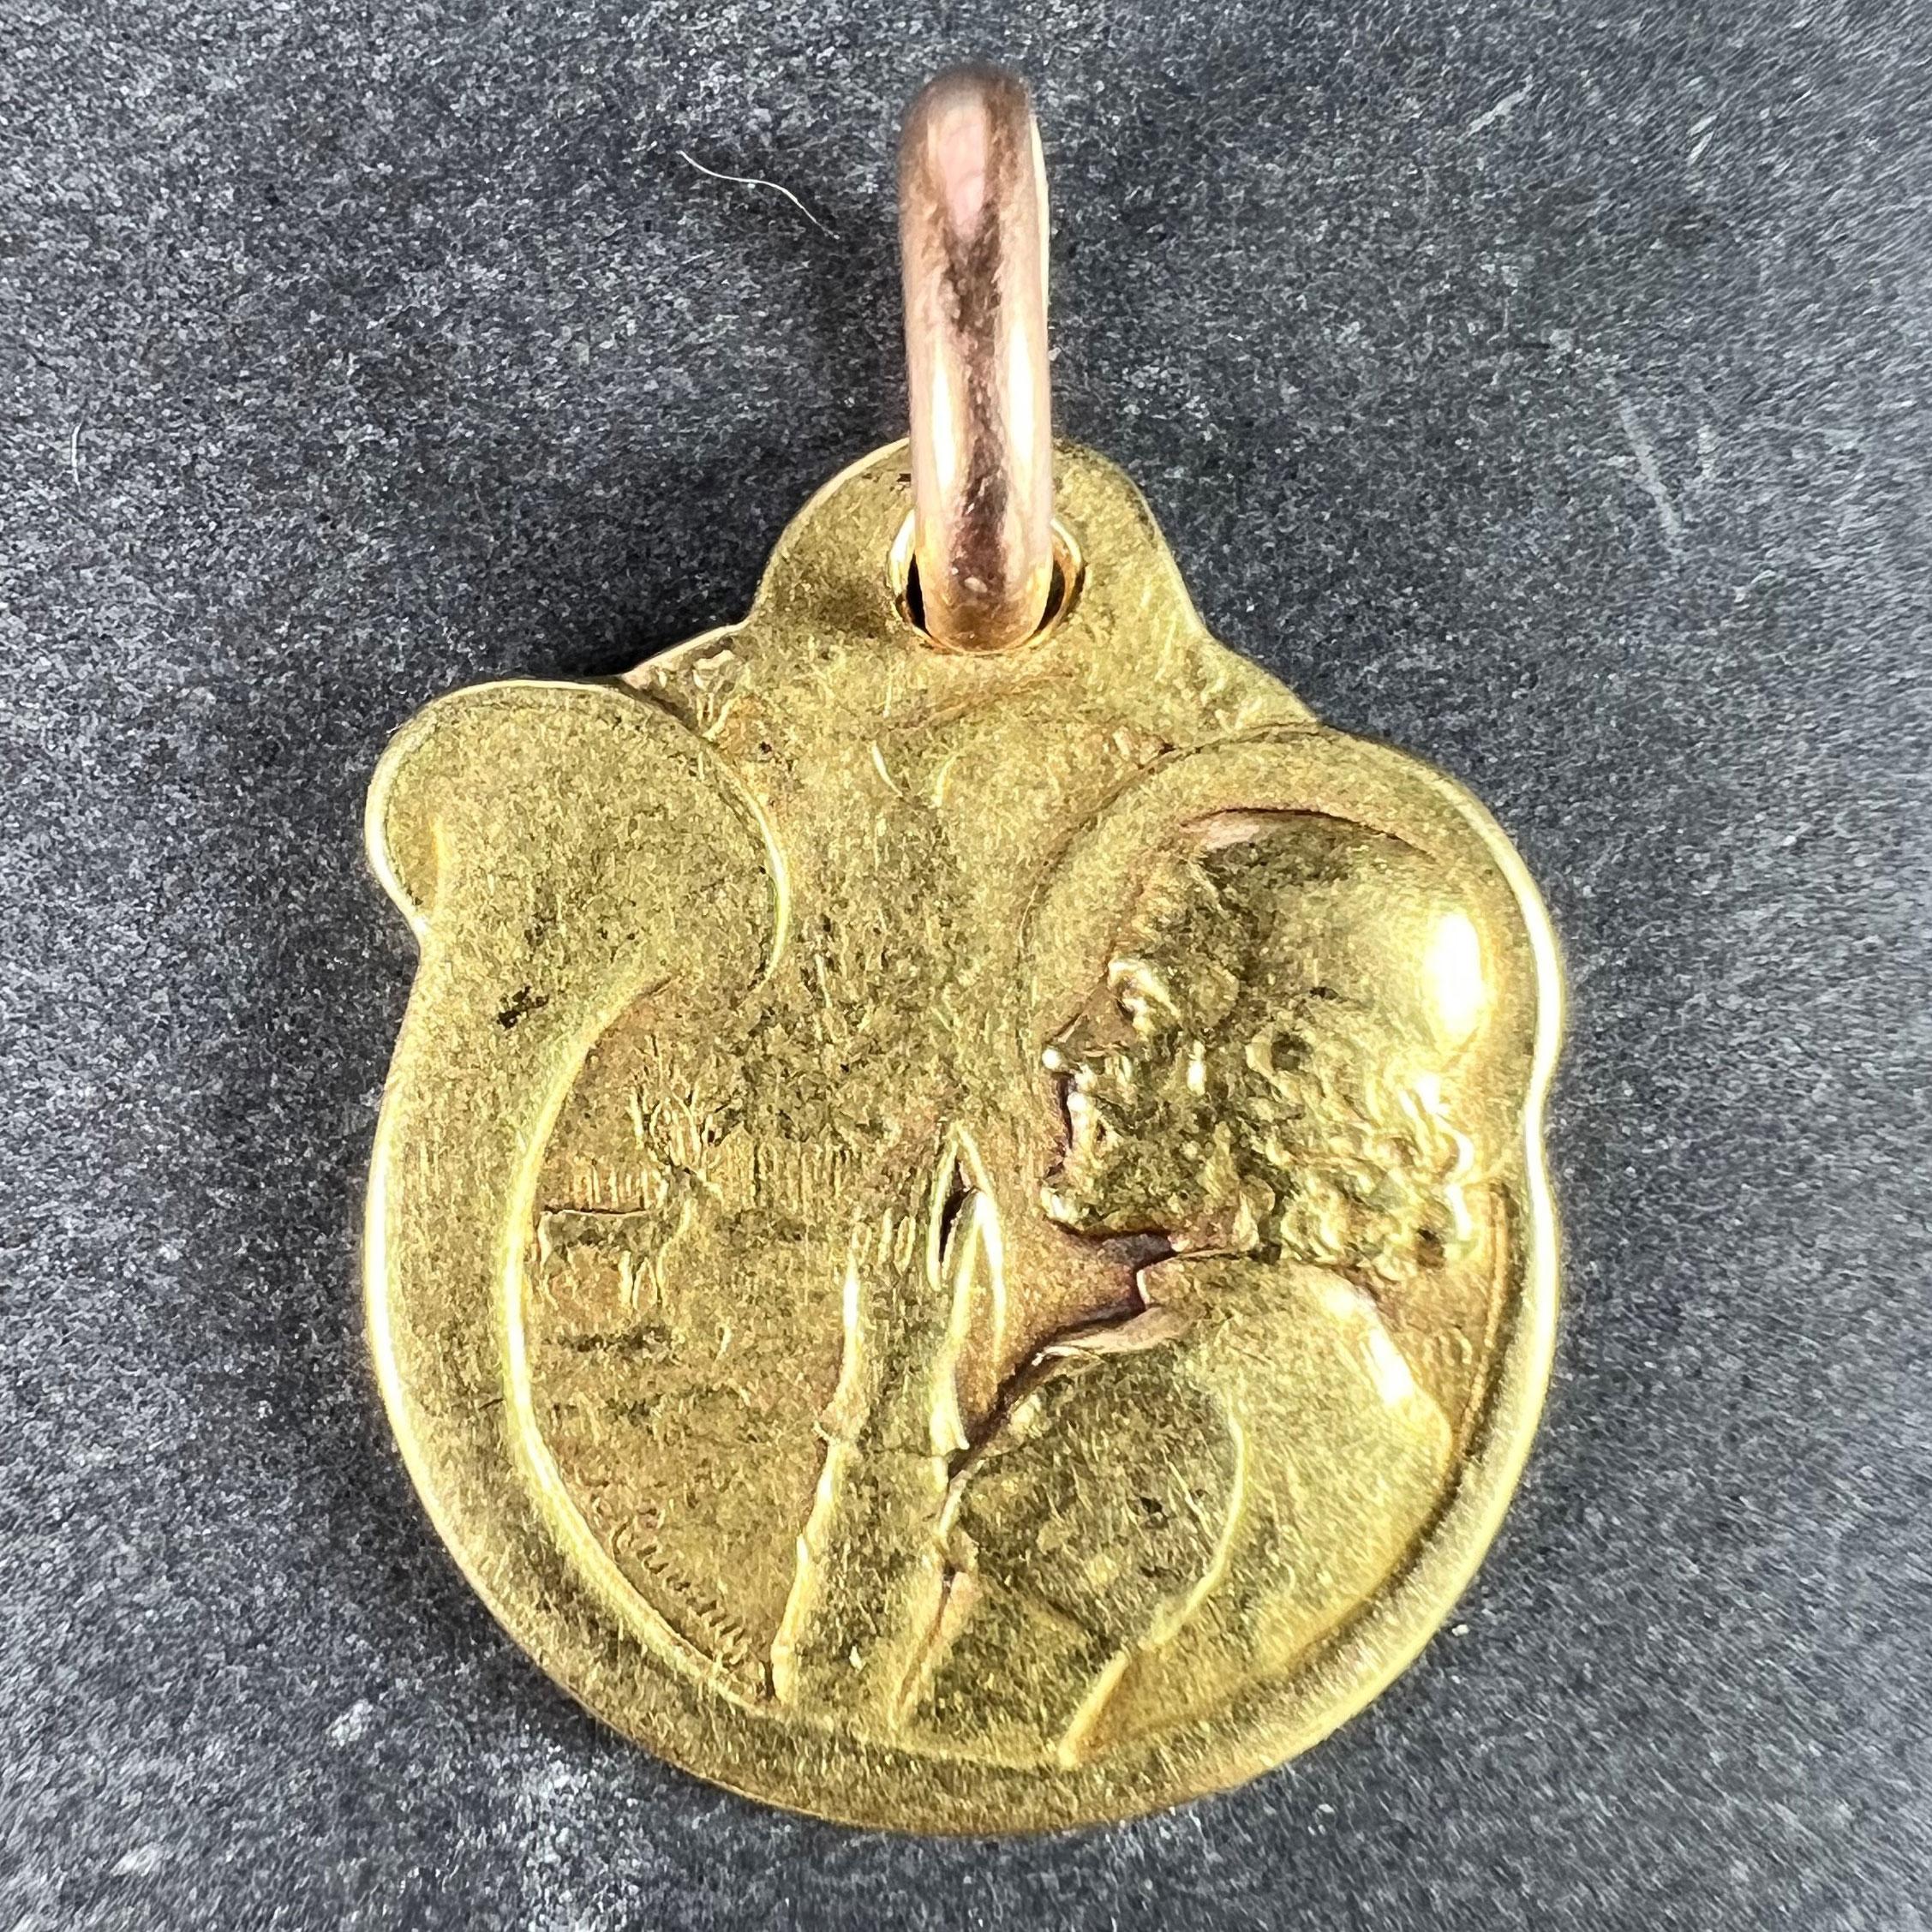 A French 18 karat (18K) yellow gold charm pendant designed as an engraved medal depicting a praying man on a deer hunt surrounded by a hunting horn looking at a stag or deer in front of a forest. The reverse showing a stag head with sword and arrow